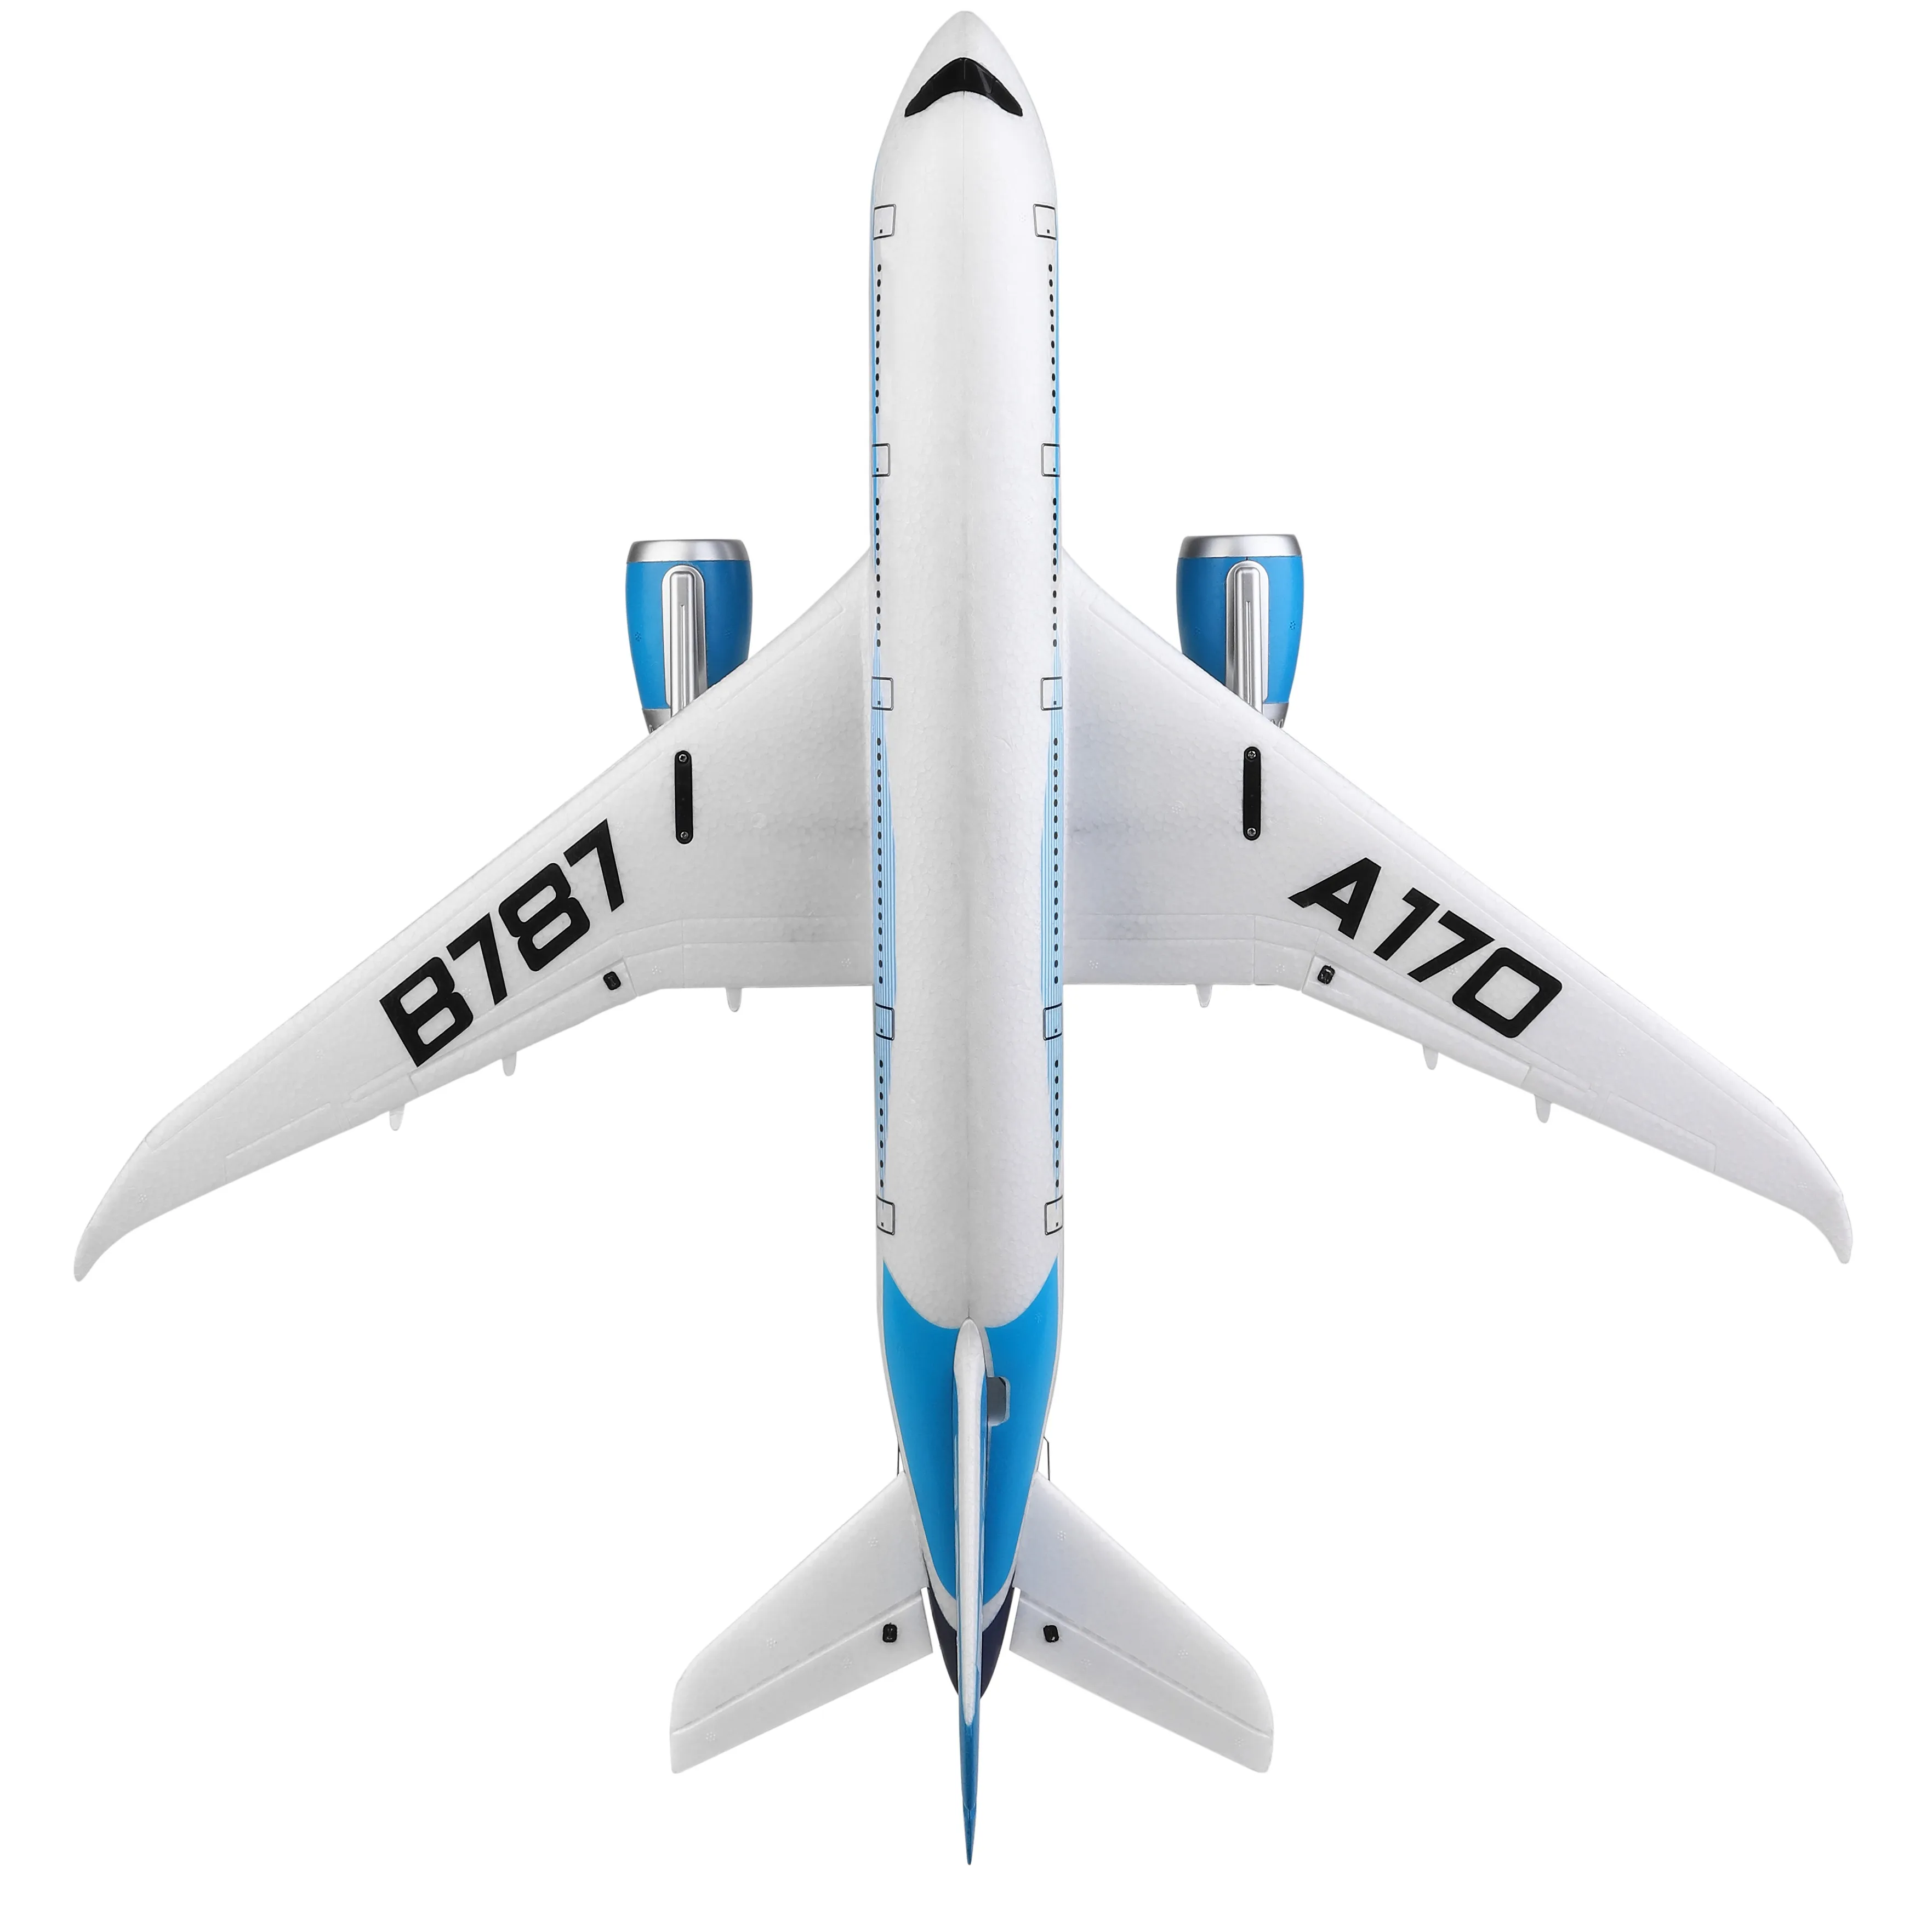 WL toys A170 similarity Boeing 787 3D/6G detachable remote control airplanes glider 2.4G Double 1109 Brushless Motor